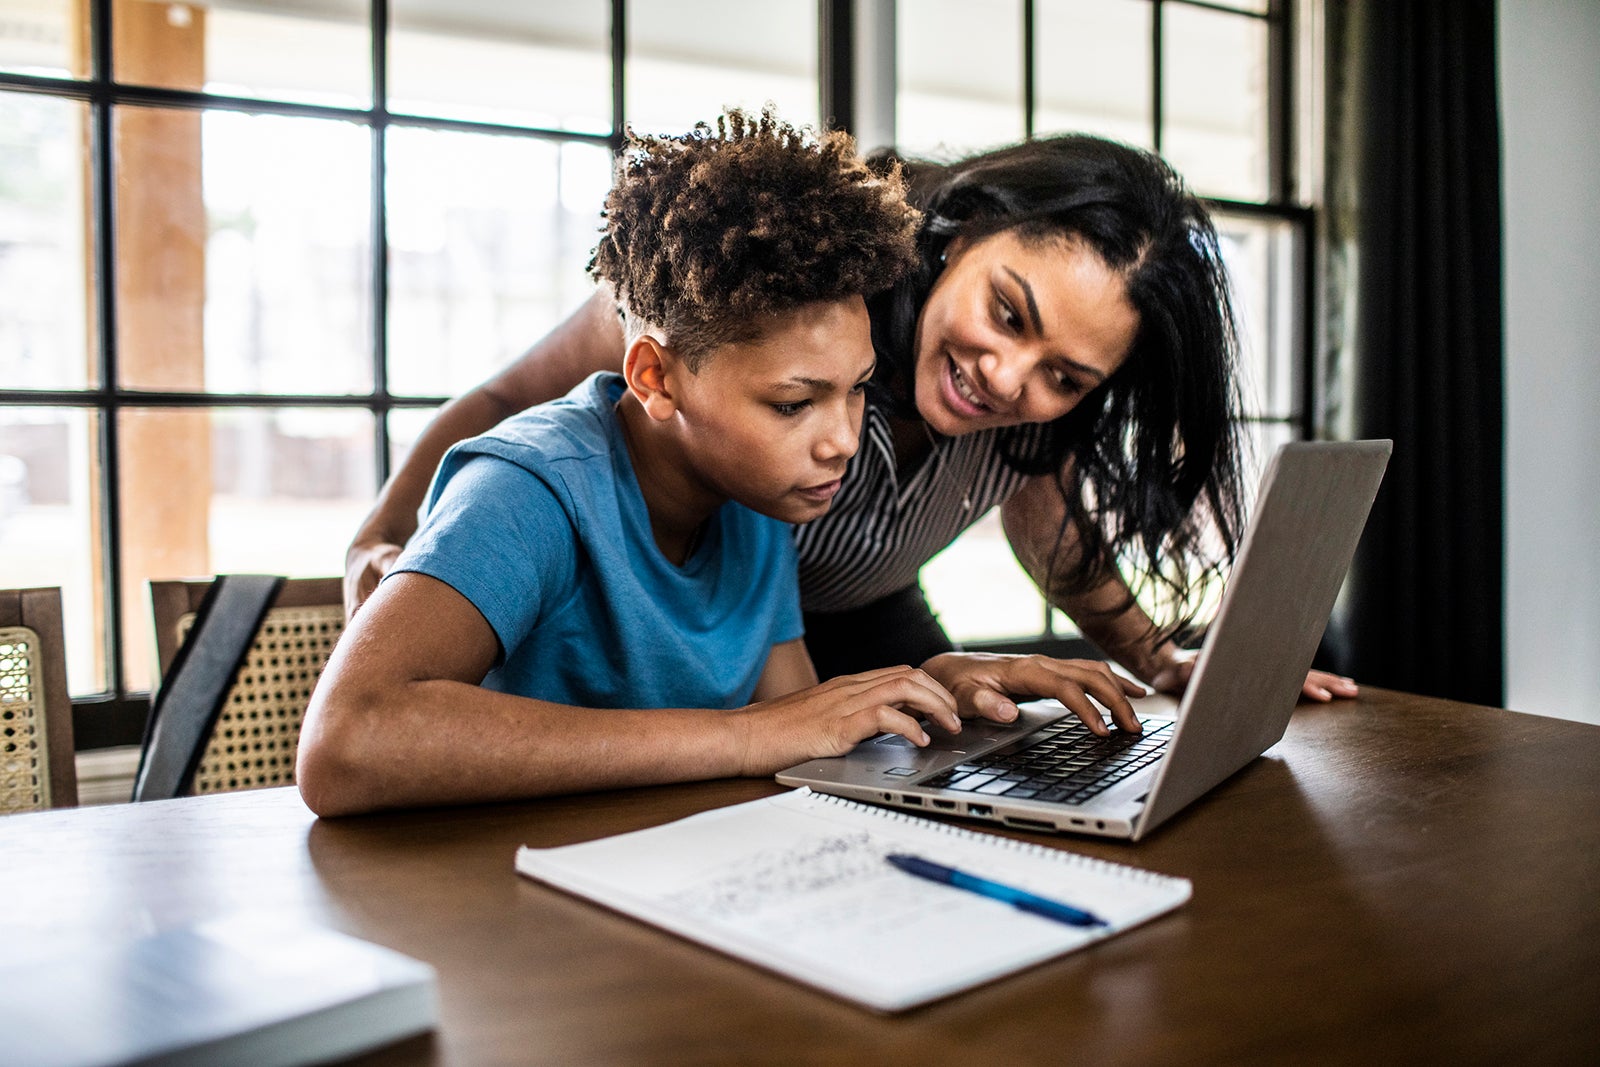 a parent and child look at information together on a laptop